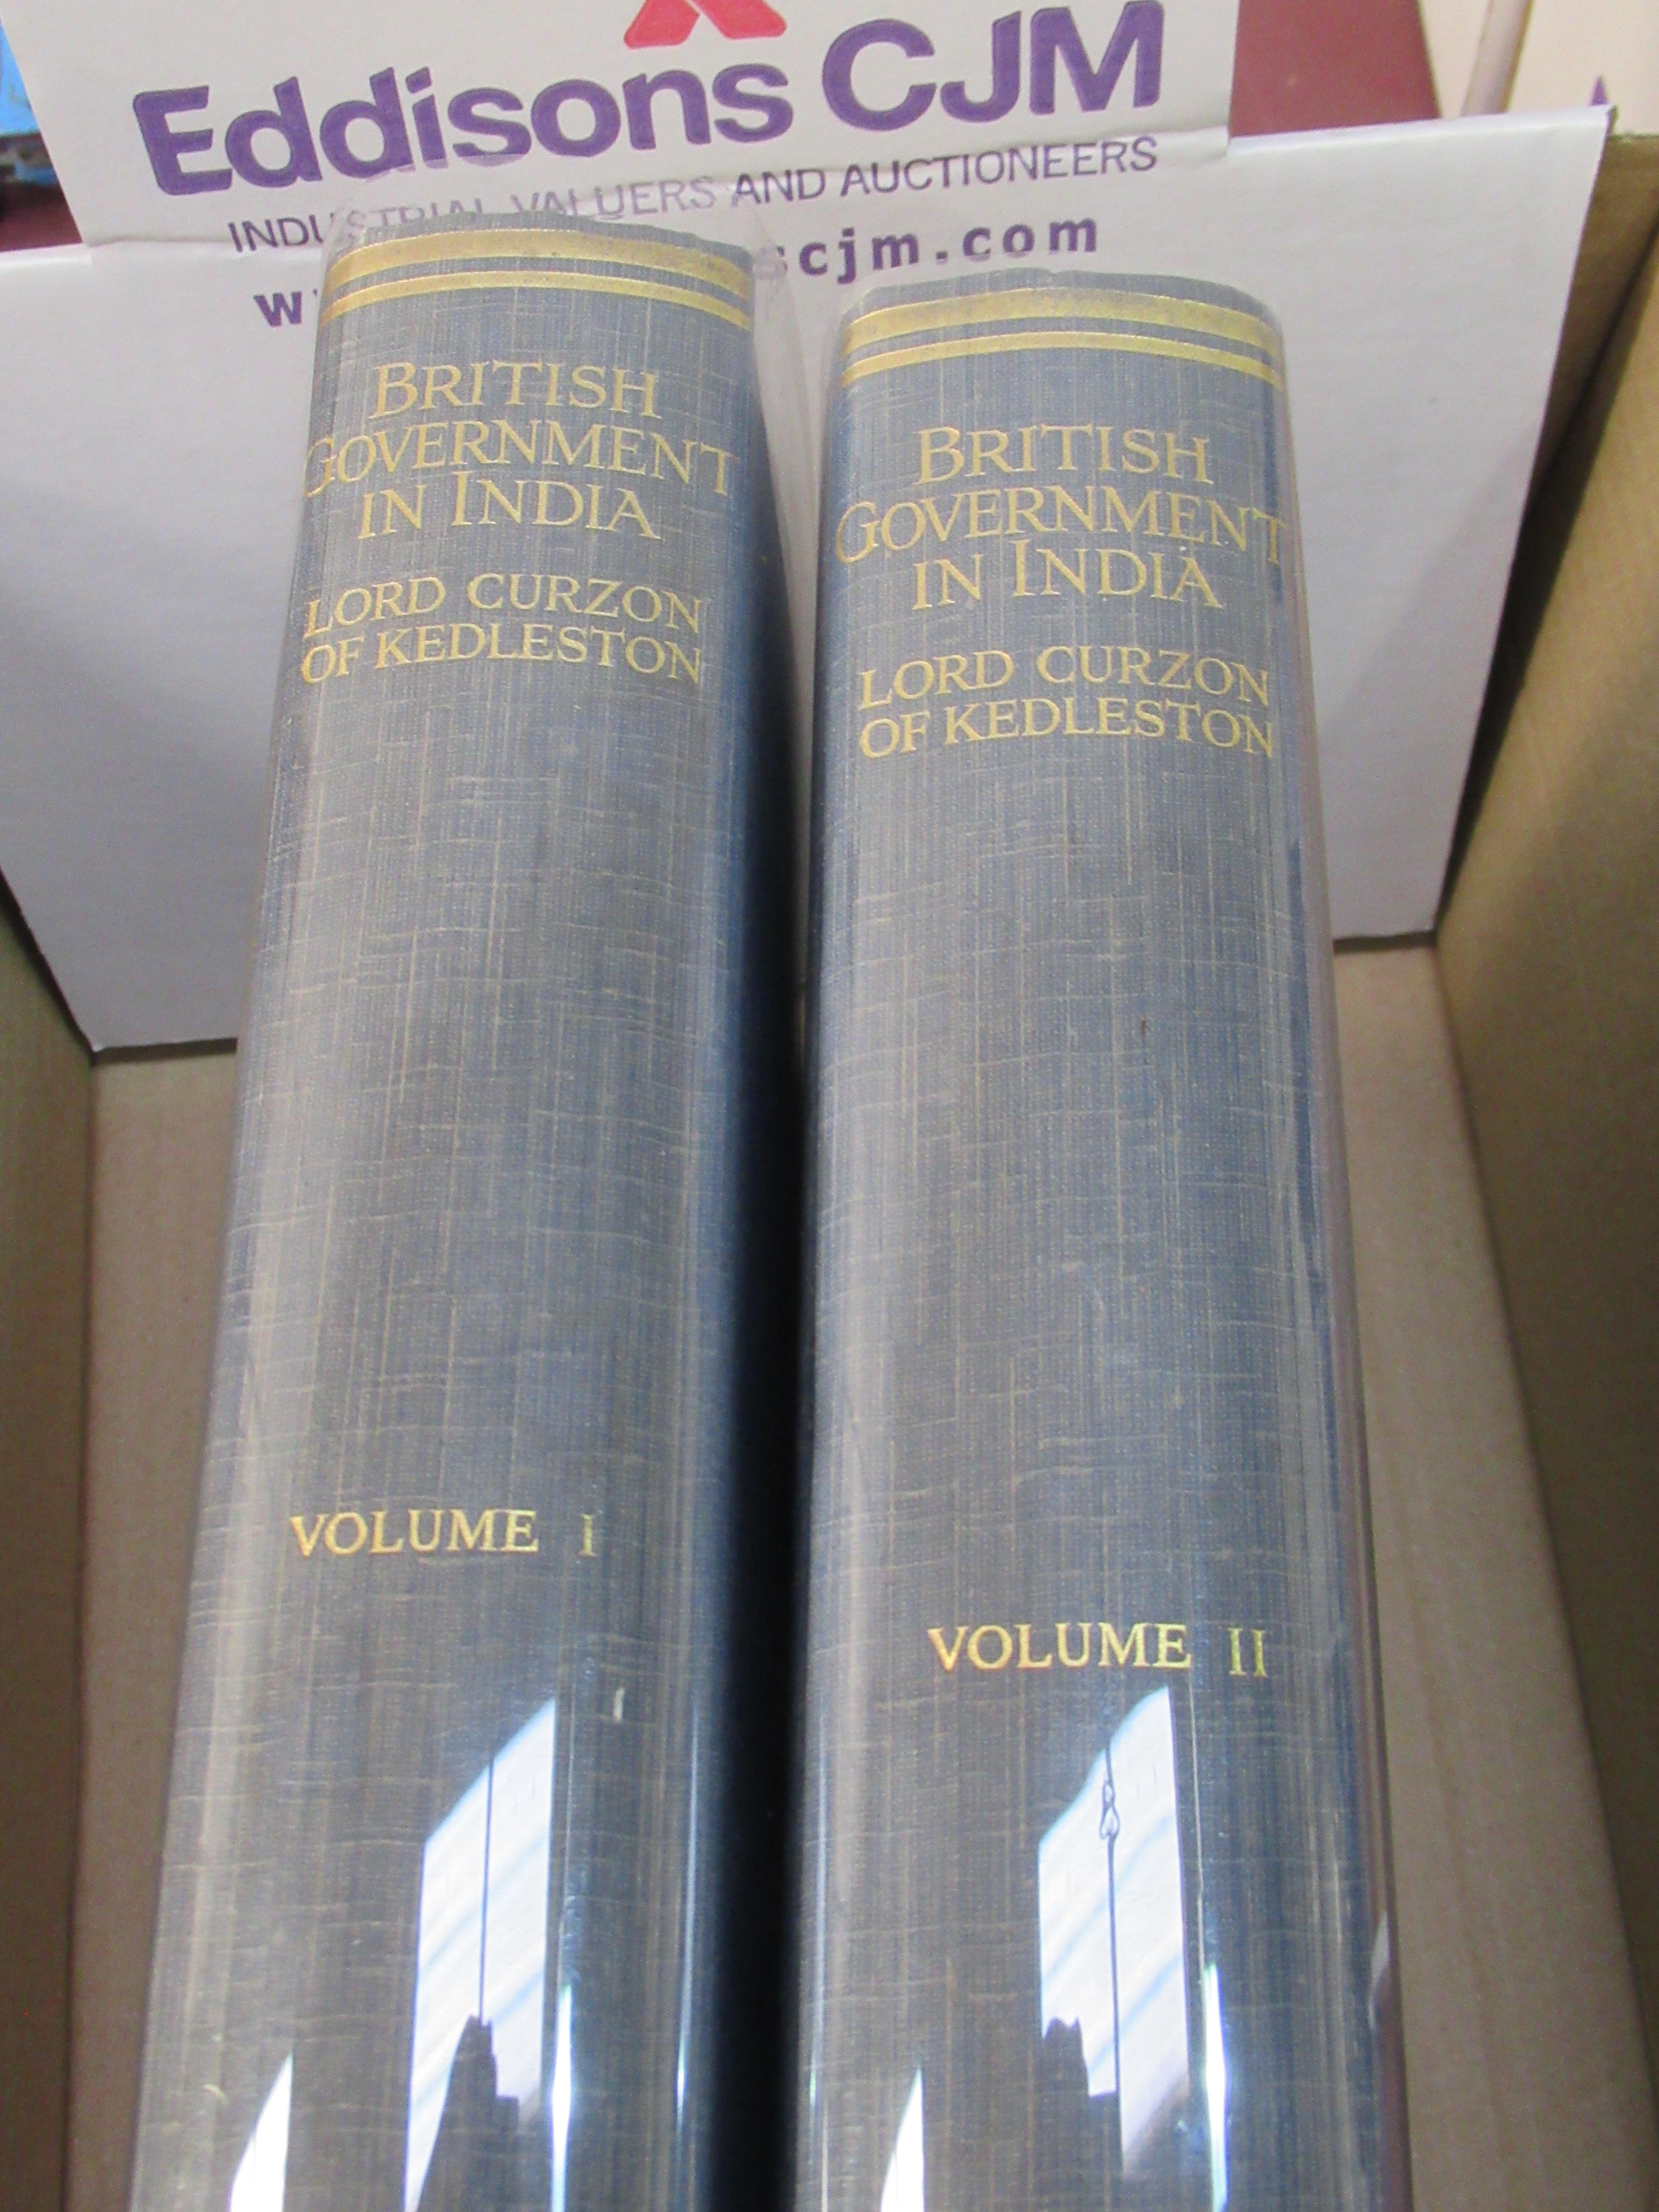 "British Government in India" Vols 1 & 2 by Lord Curzon of Keddlestone. First Published in 1925, Pub - Image 3 of 3